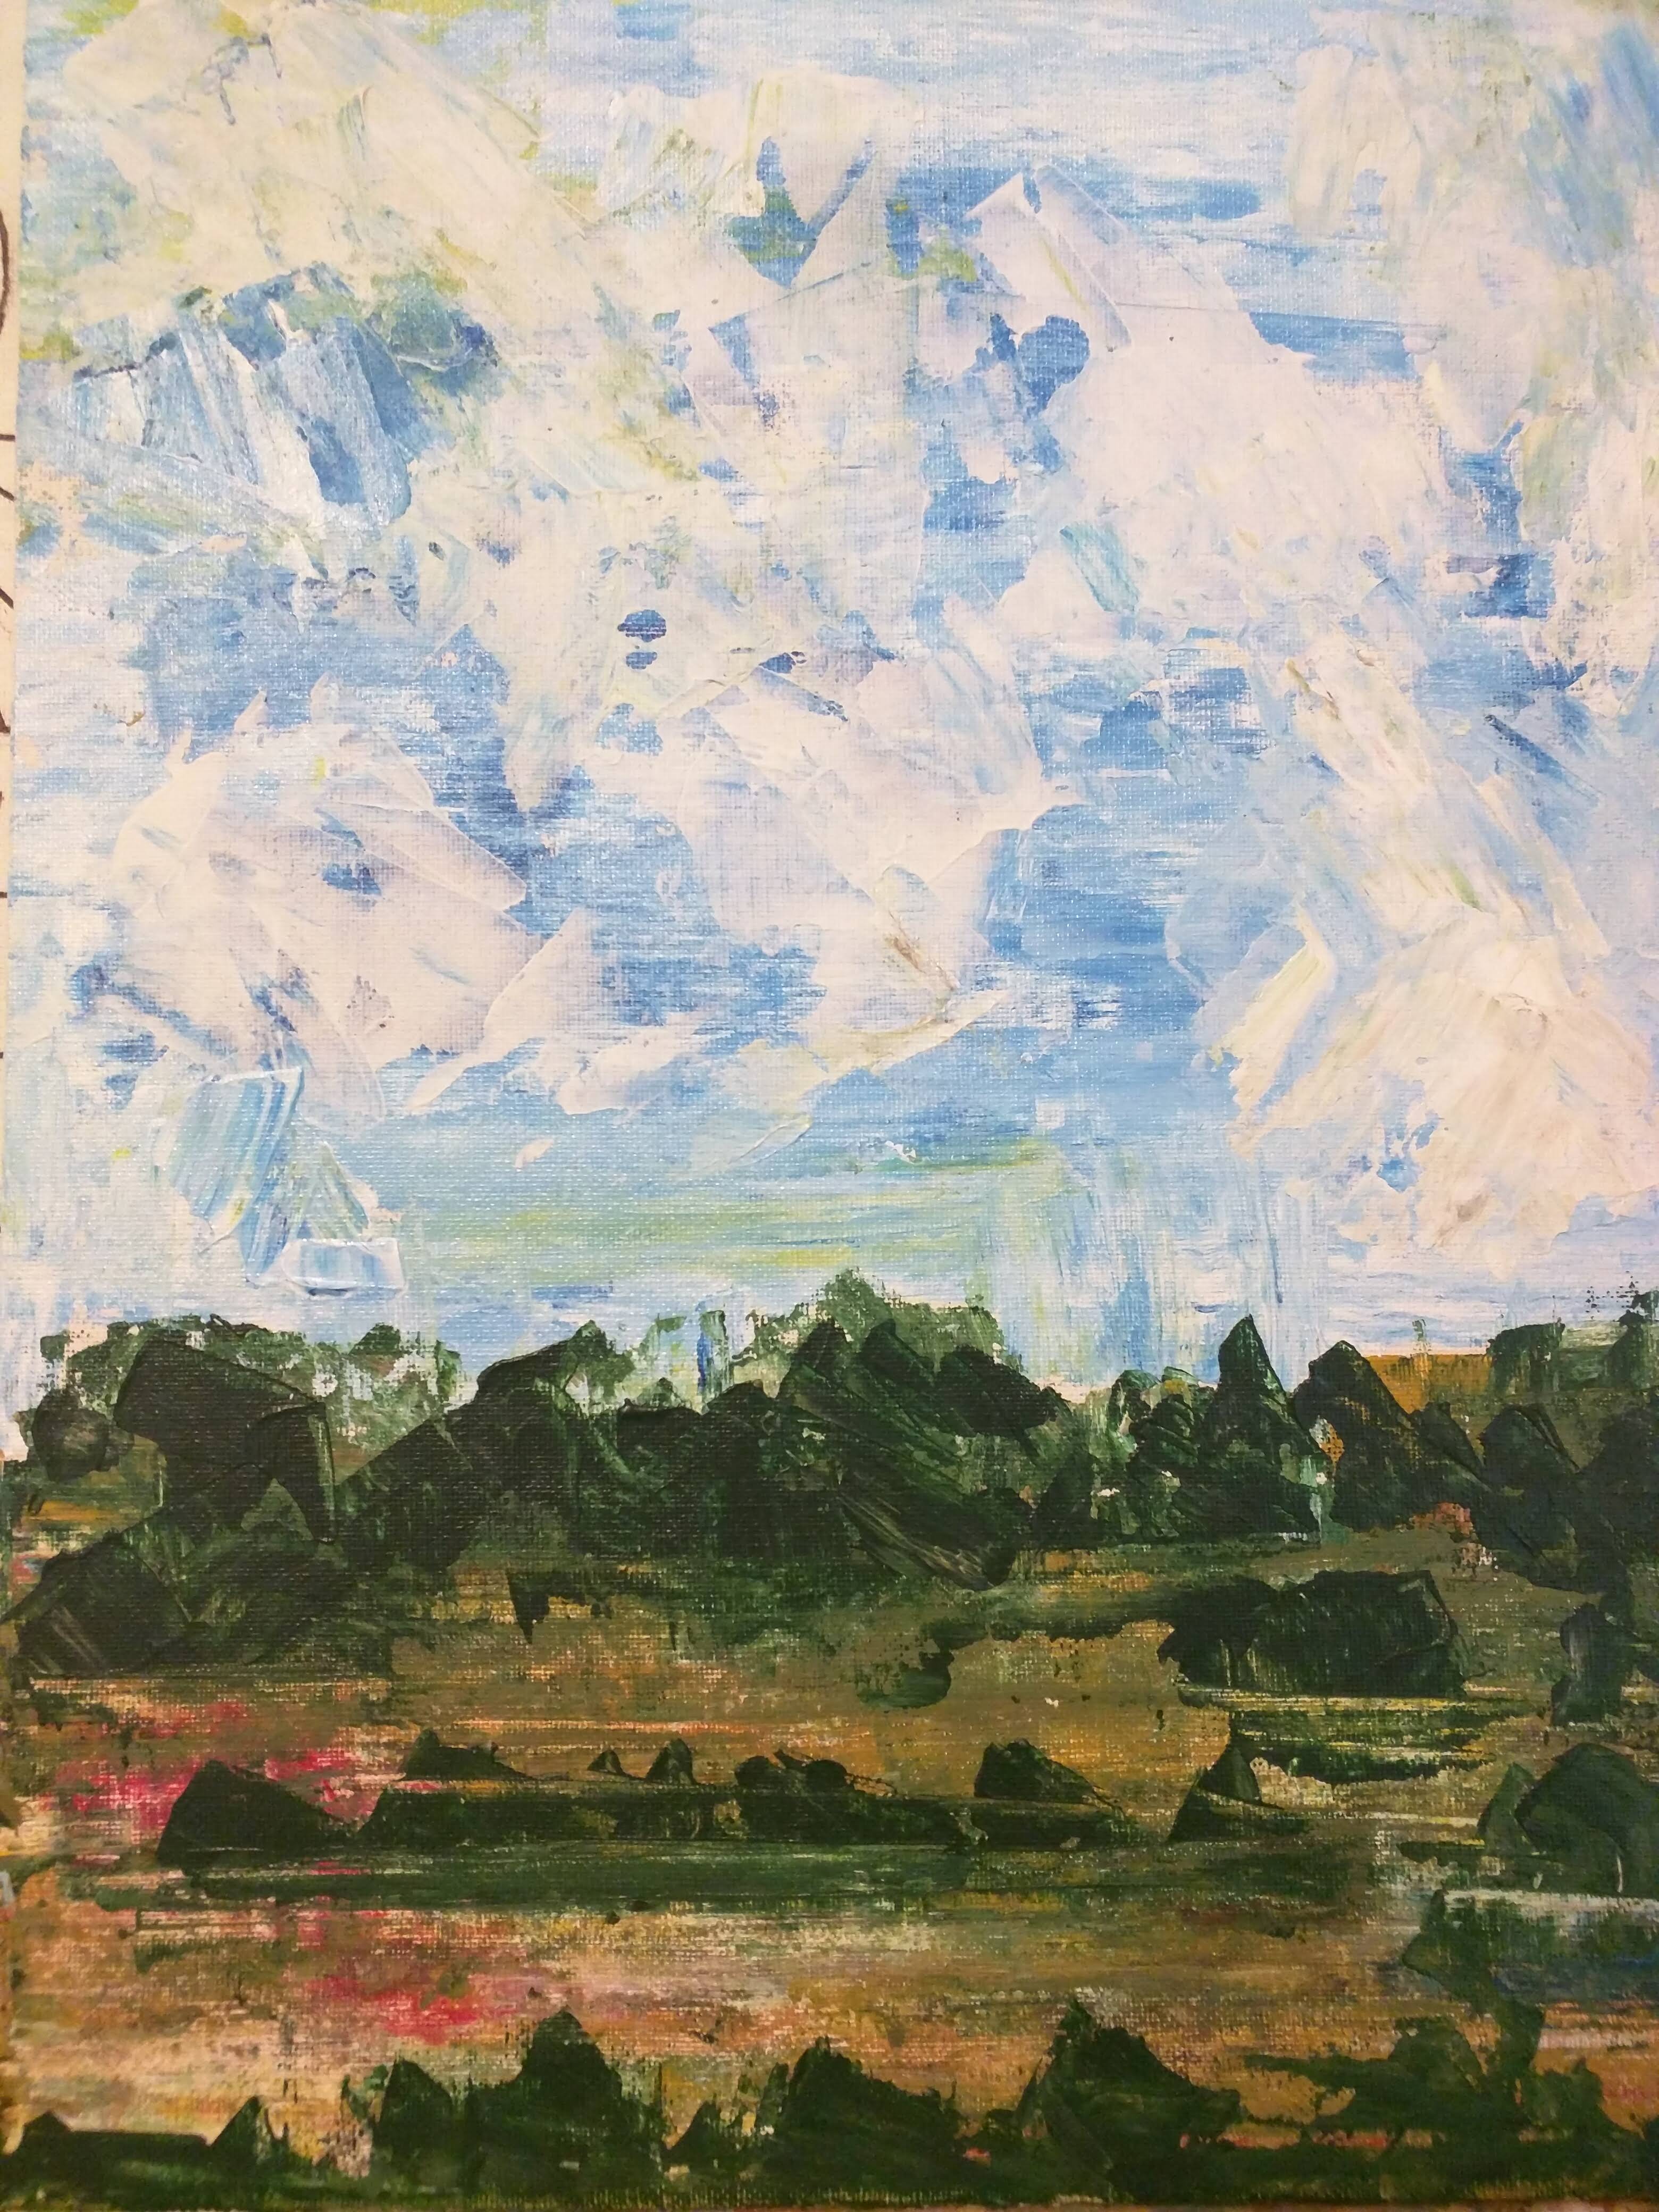 a painting of an abstract landscape